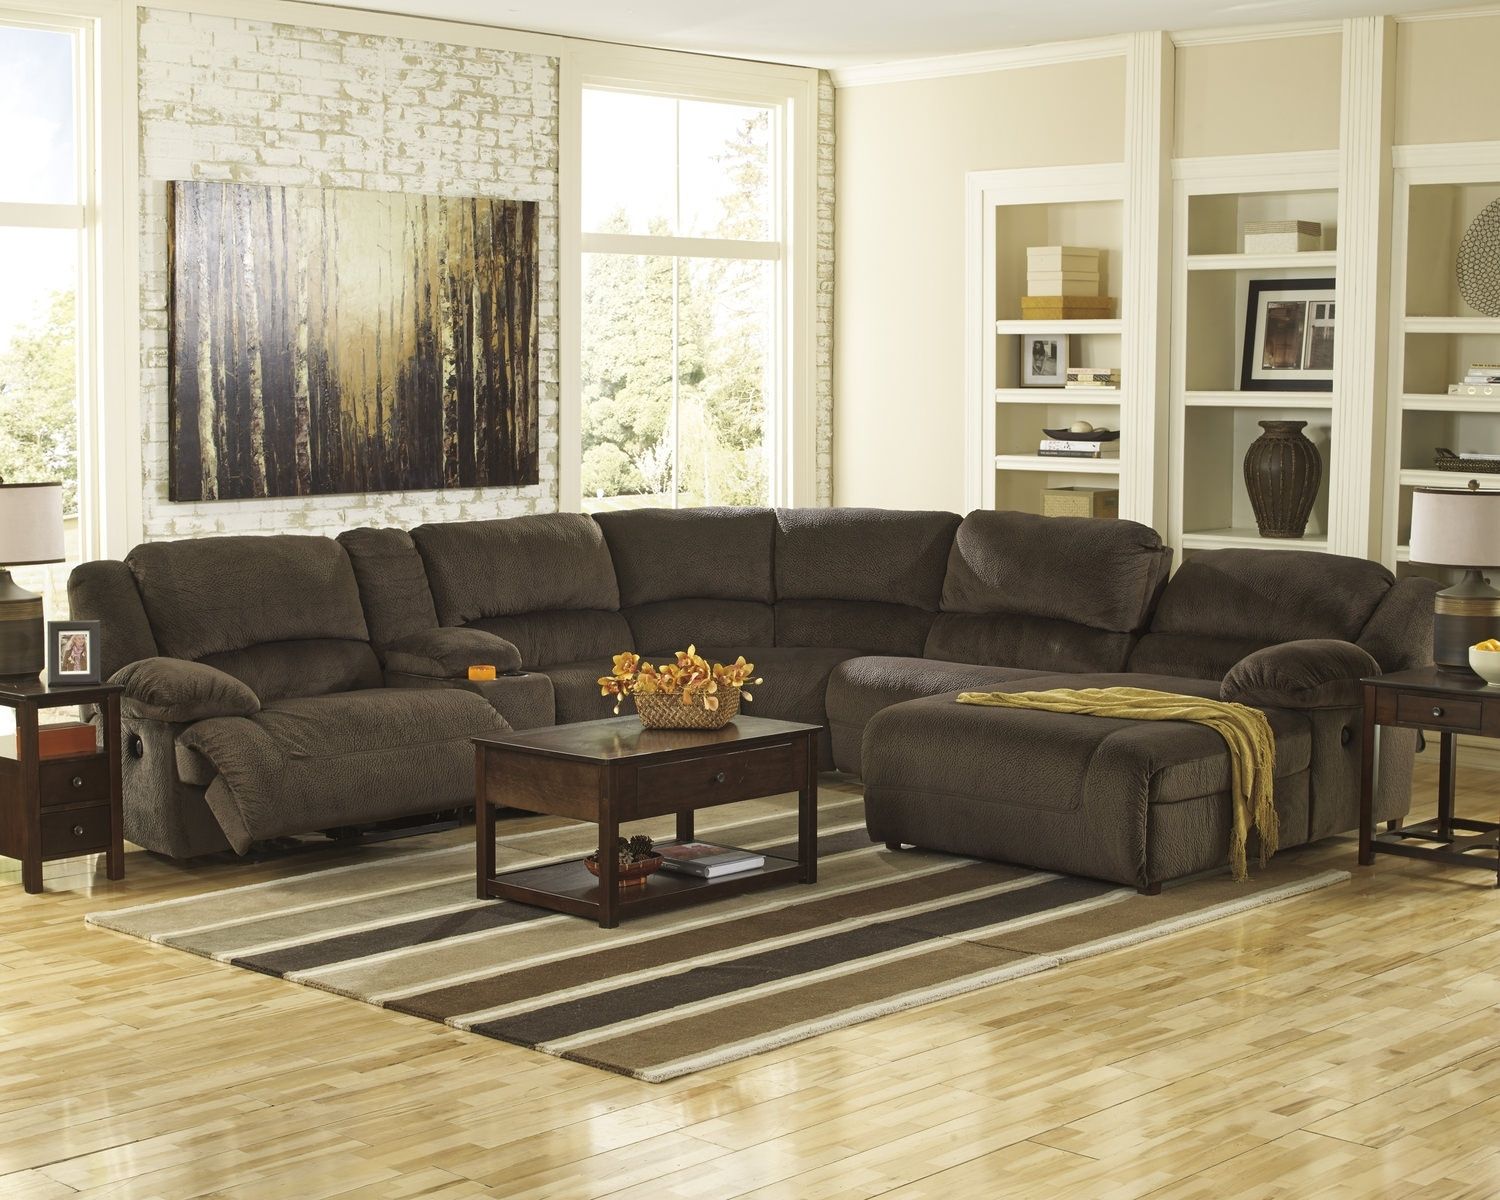 Hero 6 Piece Reclining Sectional | Dock86 With Regard To Dock 86 Sectional Sofas (View 2 of 10)